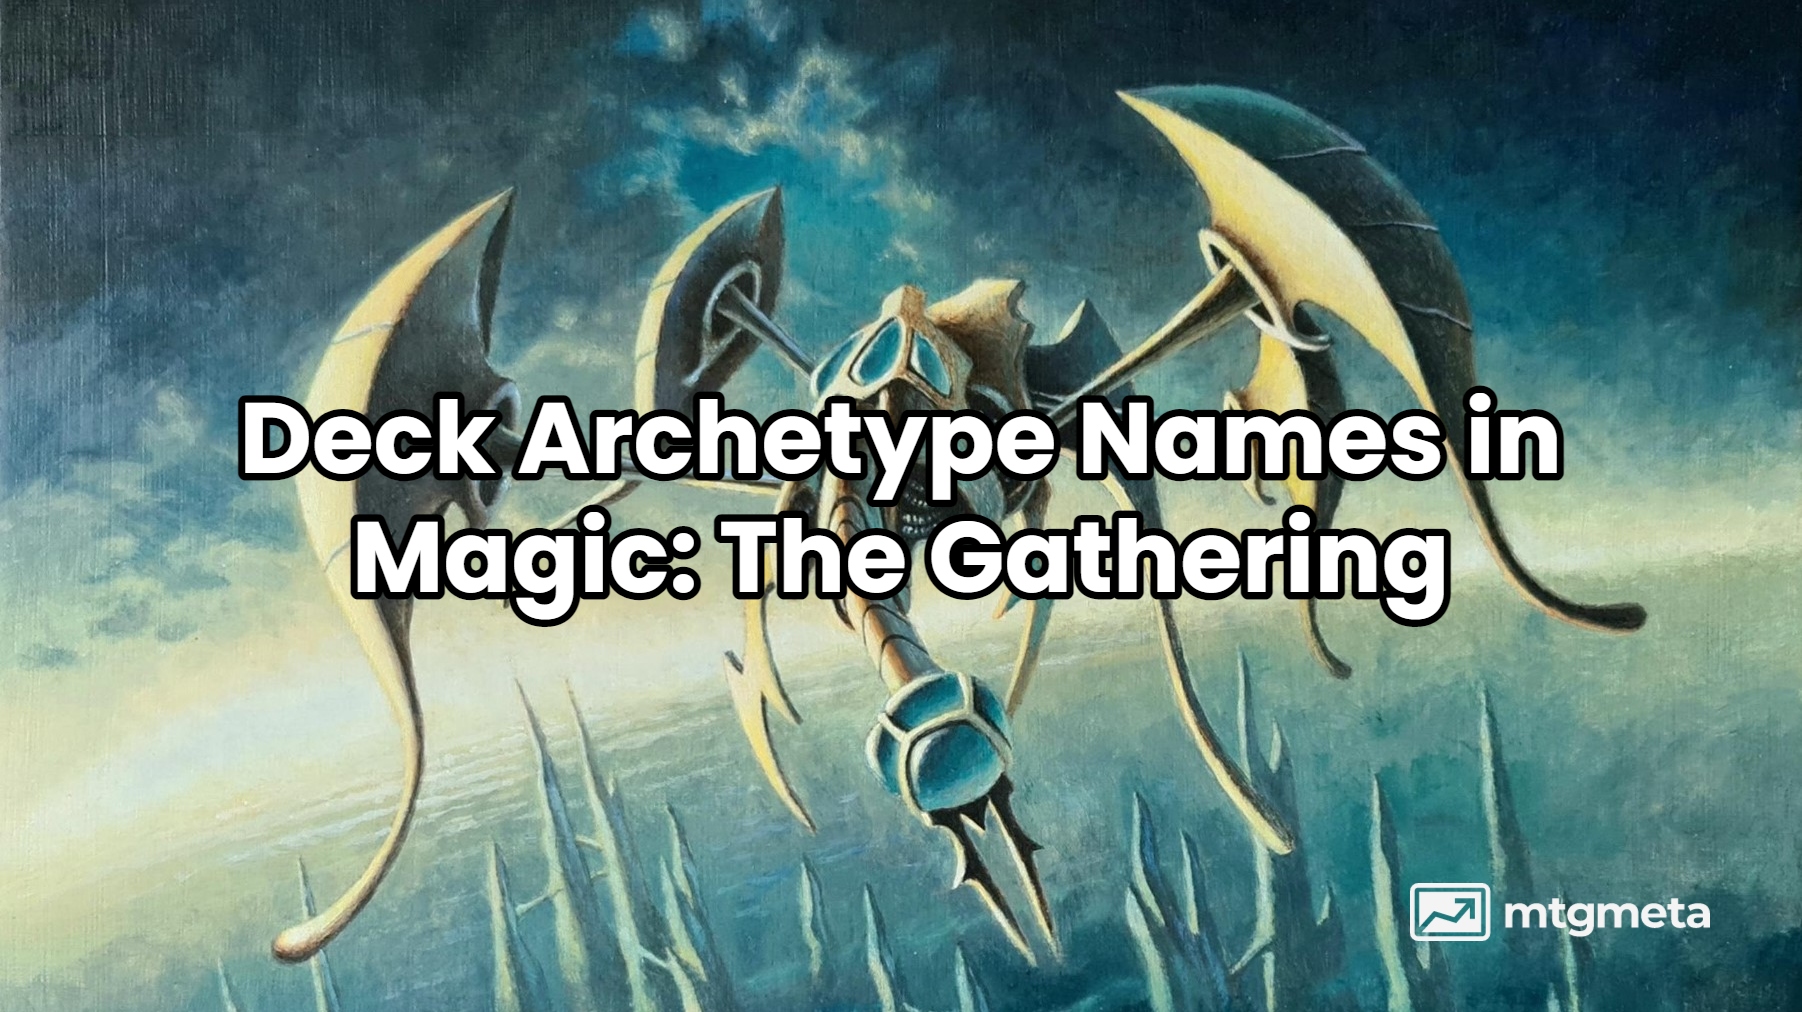 Deck Archetype Names in Magic: The Gathering